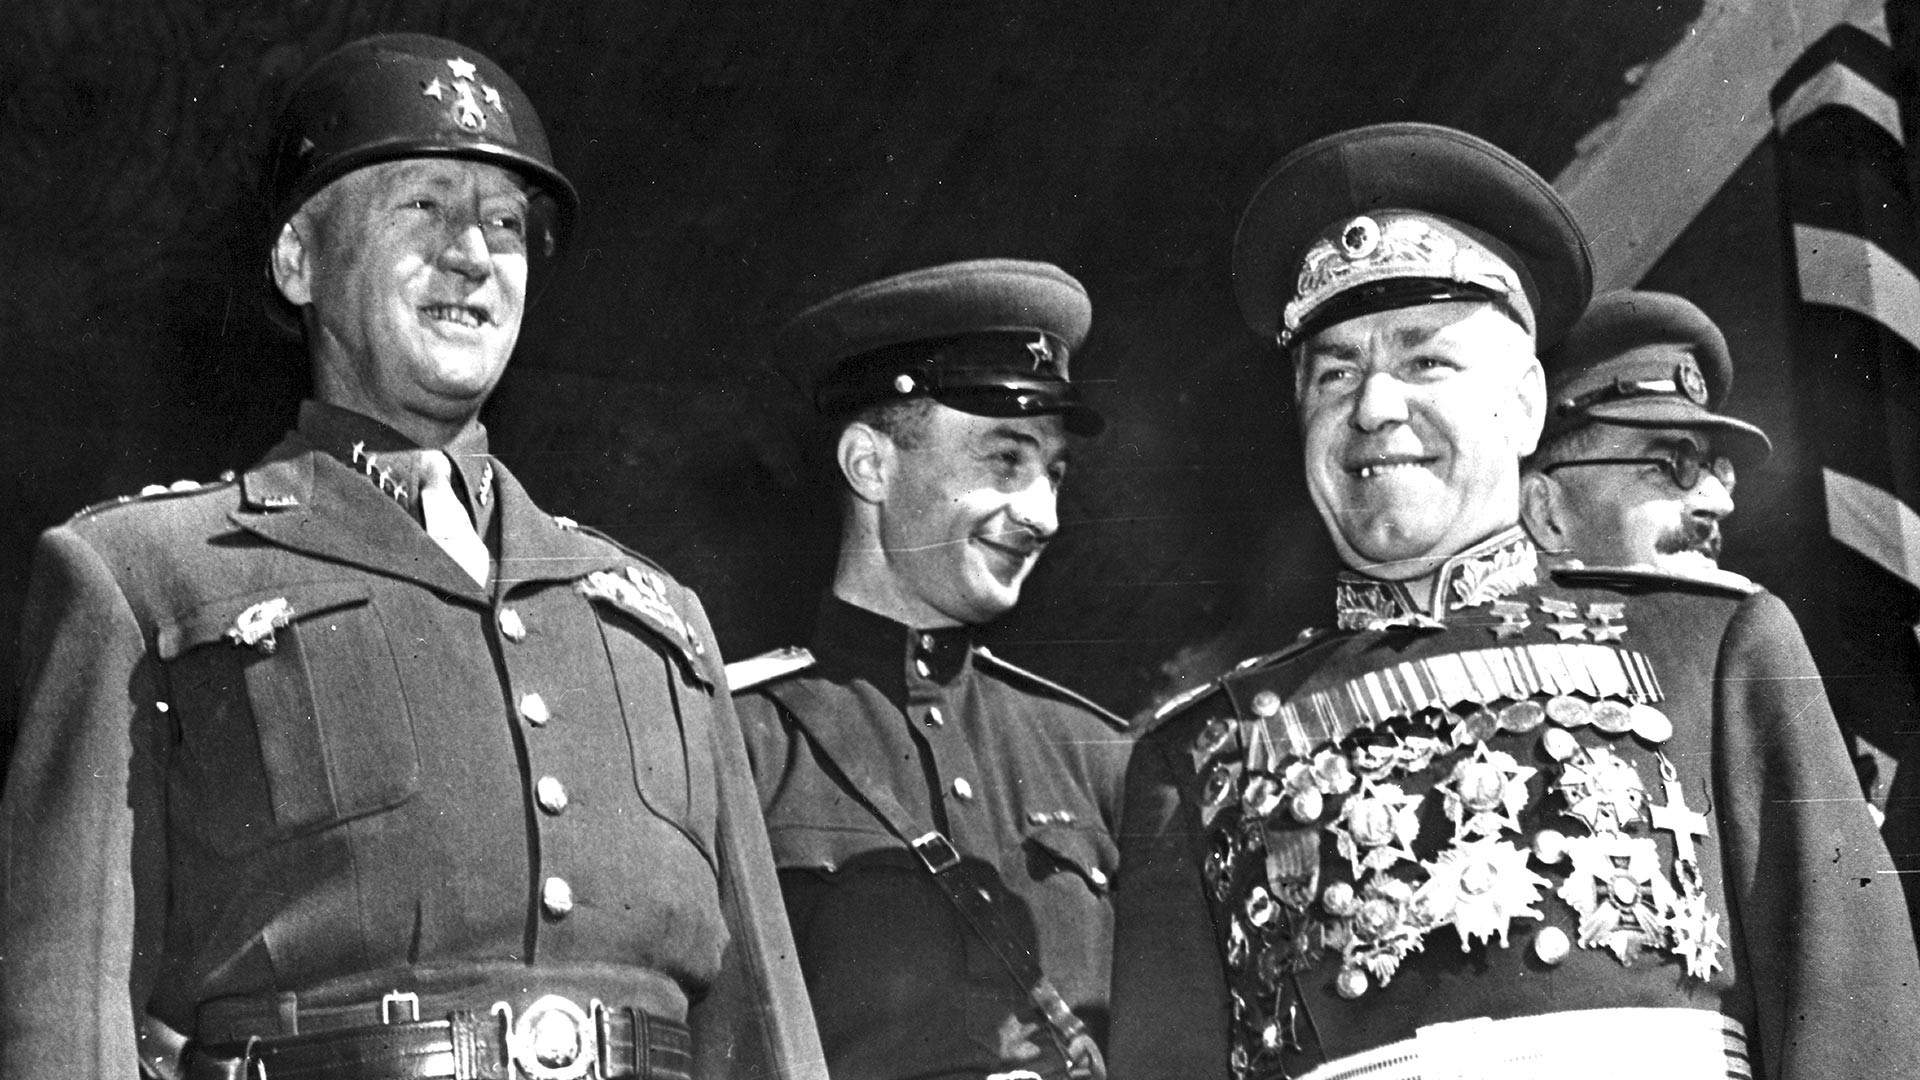 George S. Patton and Georgy Zhukov at the parade on September 7.